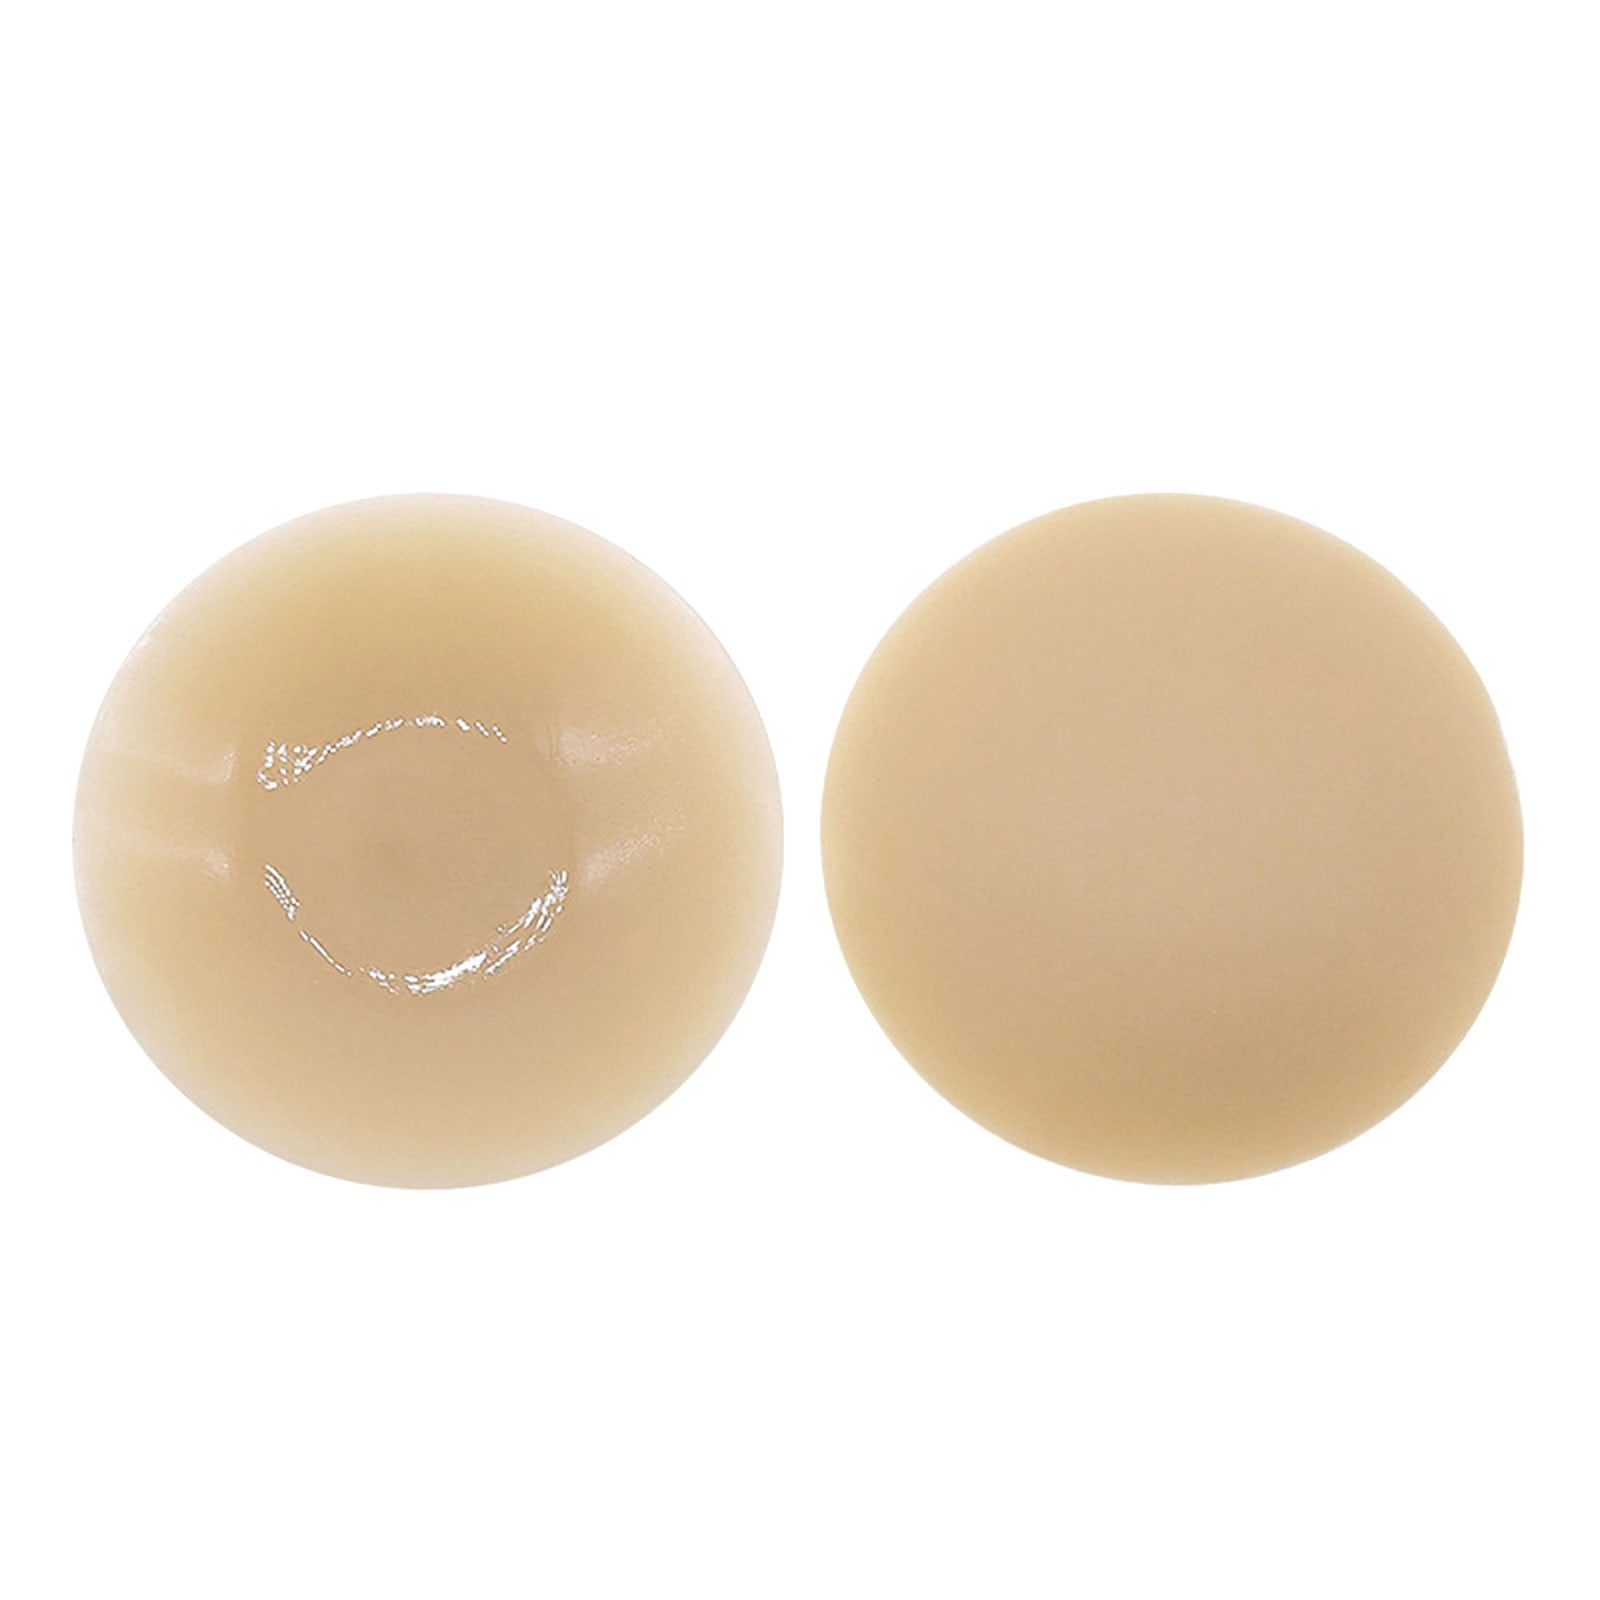 FeternalWomen's Nipple Covers Reusable Strong Adhesive Silicone